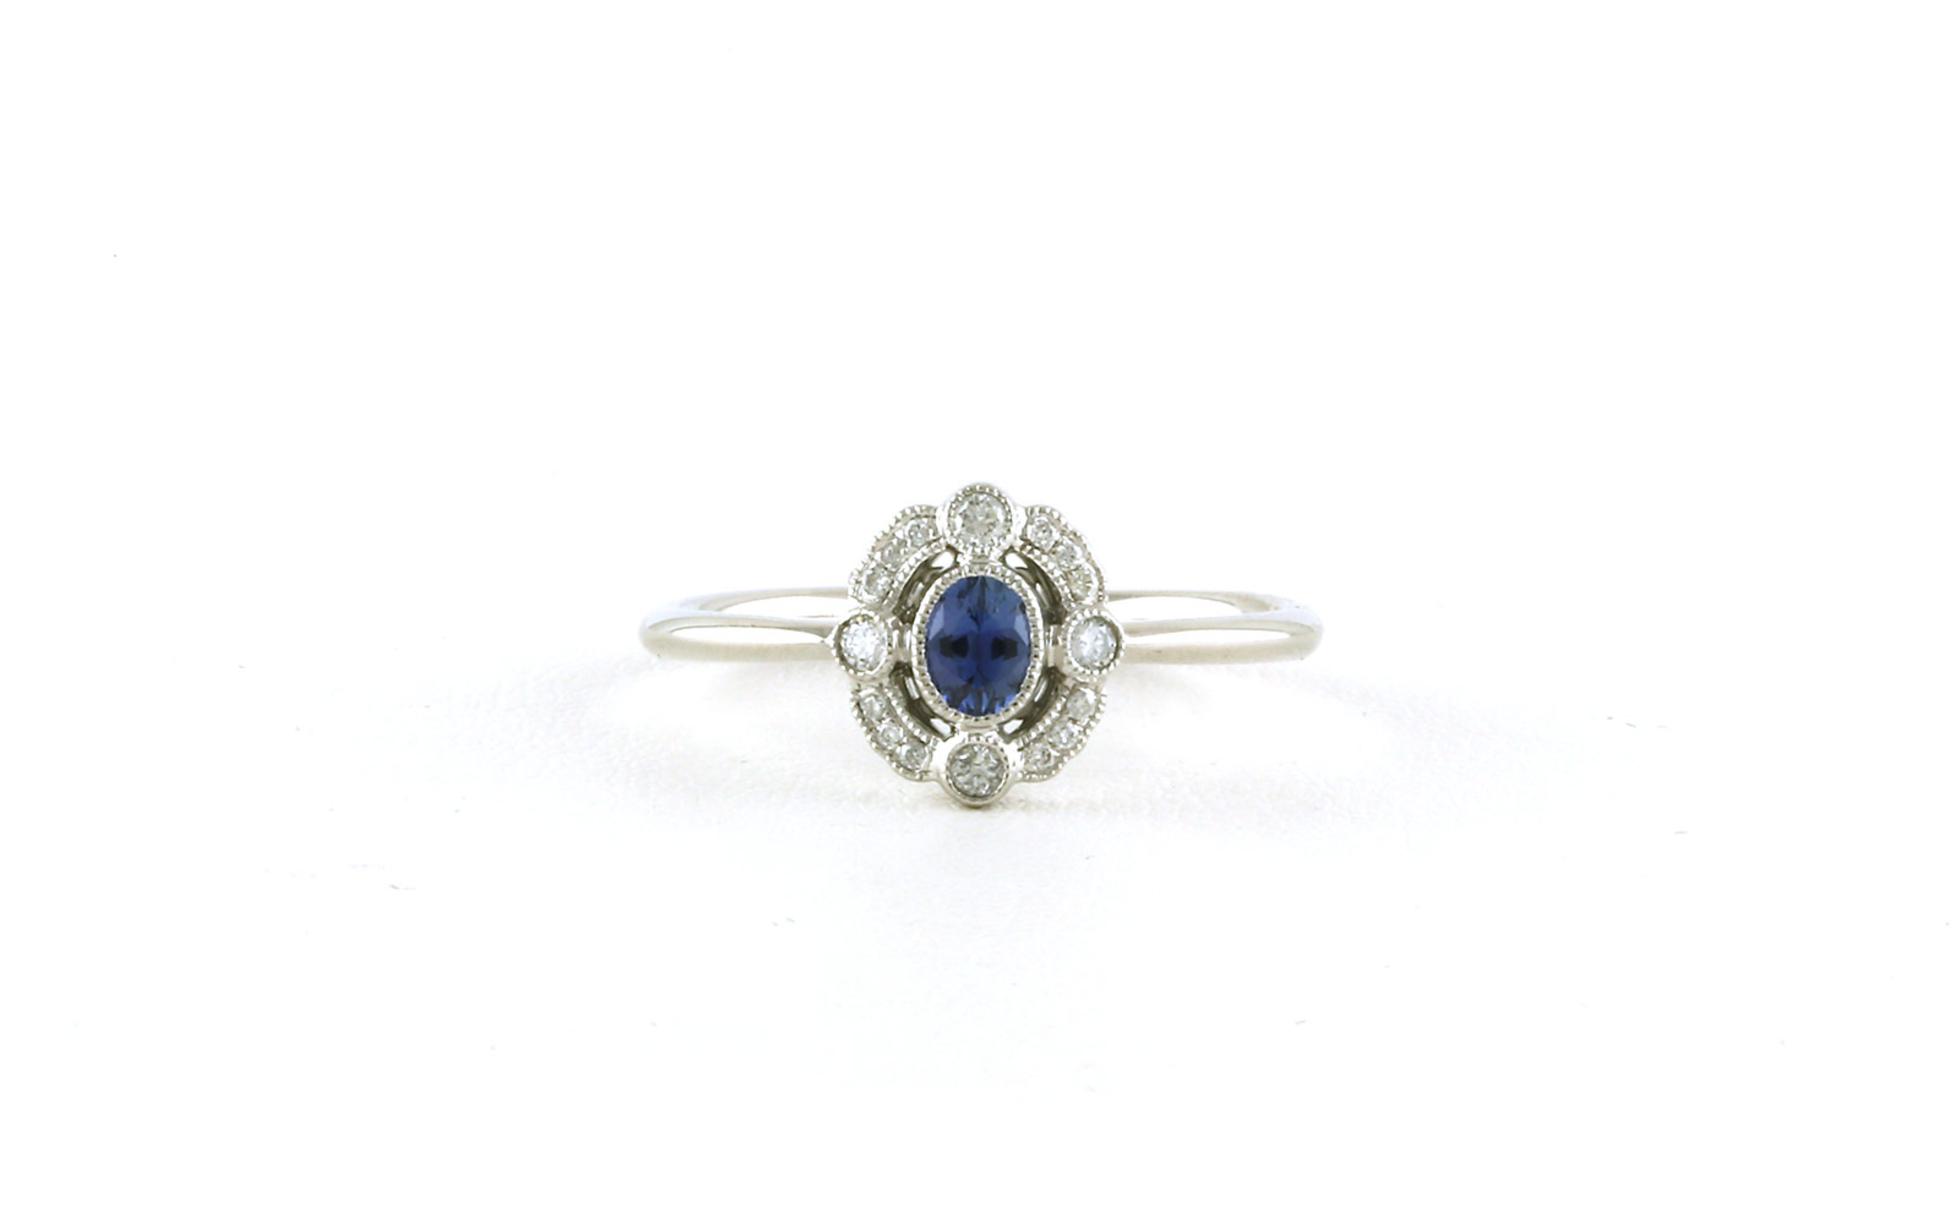 Antique-style Halo Oval-cut Montana Yogo Sapphire and Diamond Ring with Milgrain Details in White Gold (0.31cts TWT)